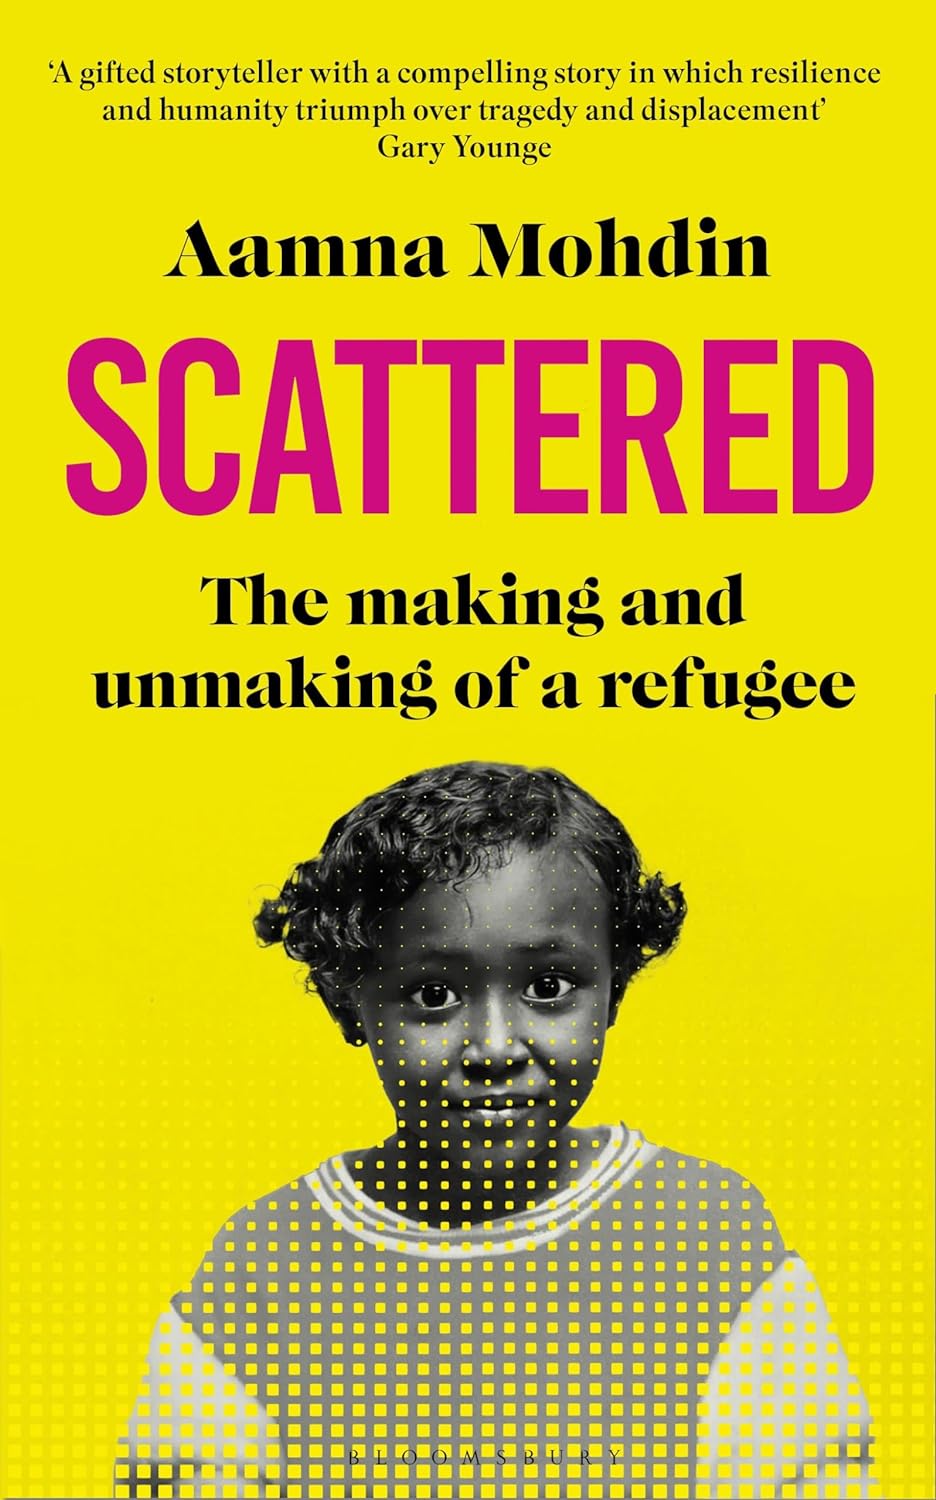 Scattered: The making and unmaking of a refugee by Aamna Mohdin Hardcover